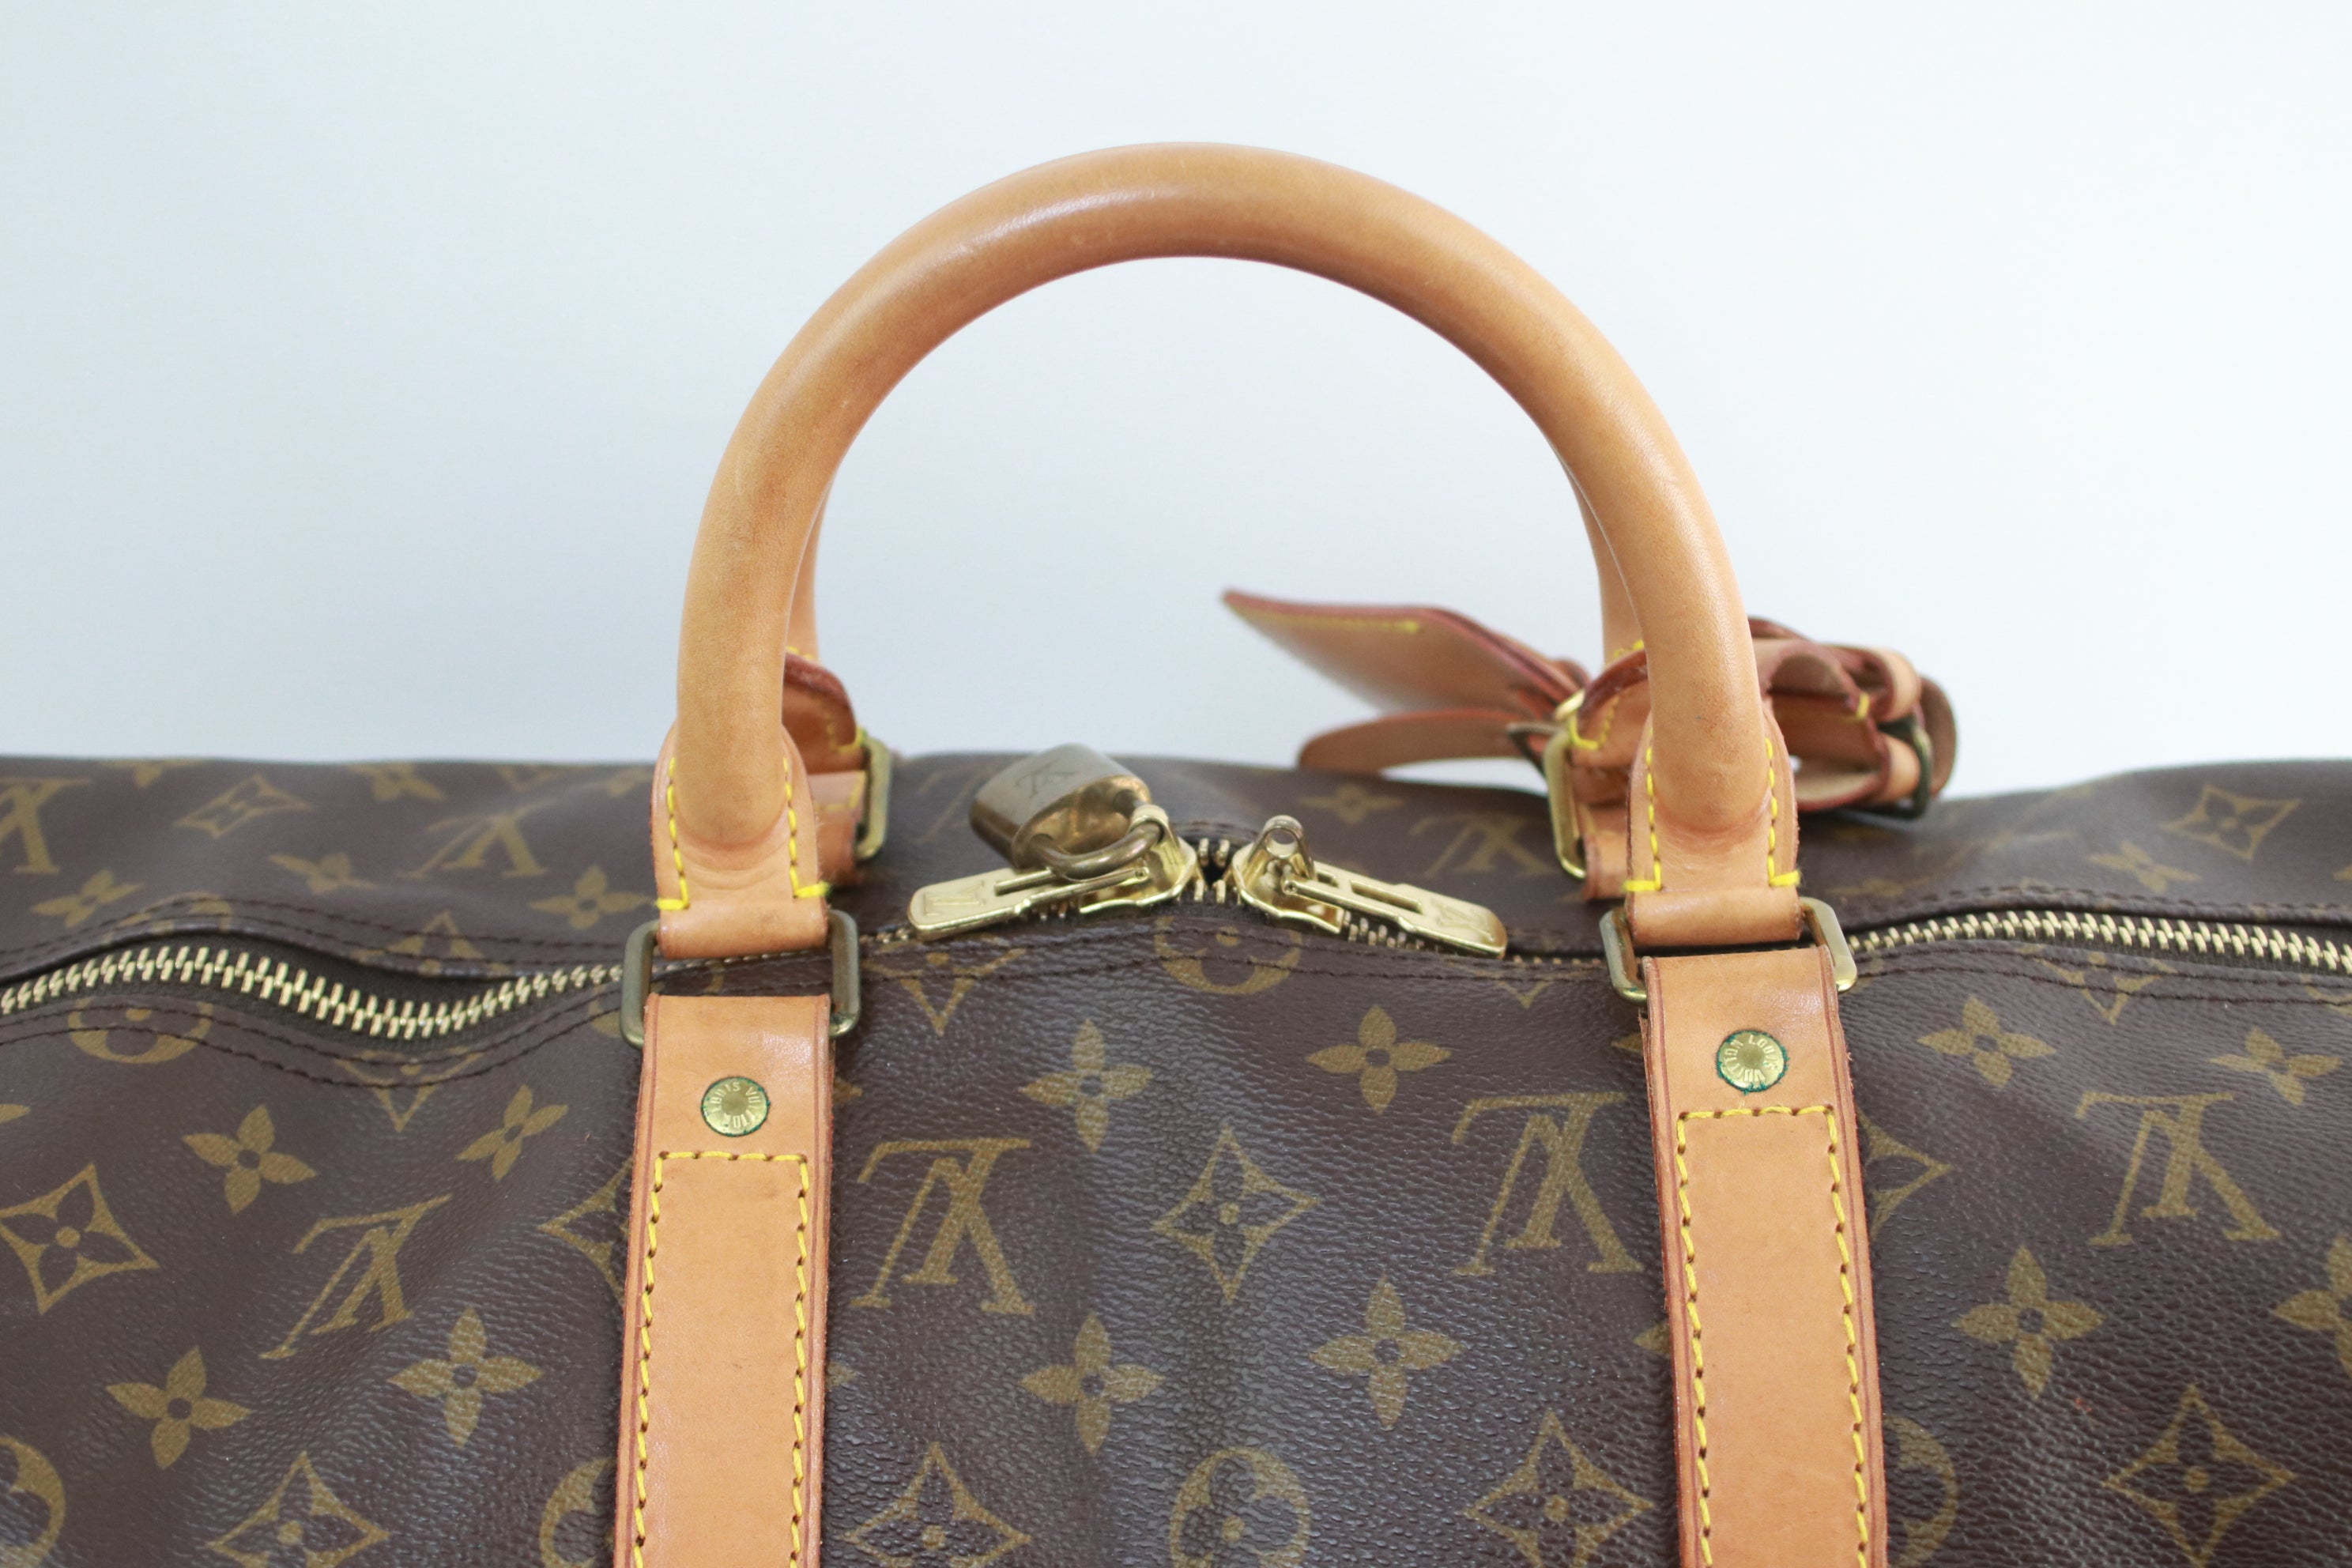 LOUIS VUITTON LOUIS VUITTON Keepall 50 Travel Boston Hand Bag M41426  Monogram Canvas Used LV M41426｜Product Code：2101217438995｜BRAND OFF Online  Store